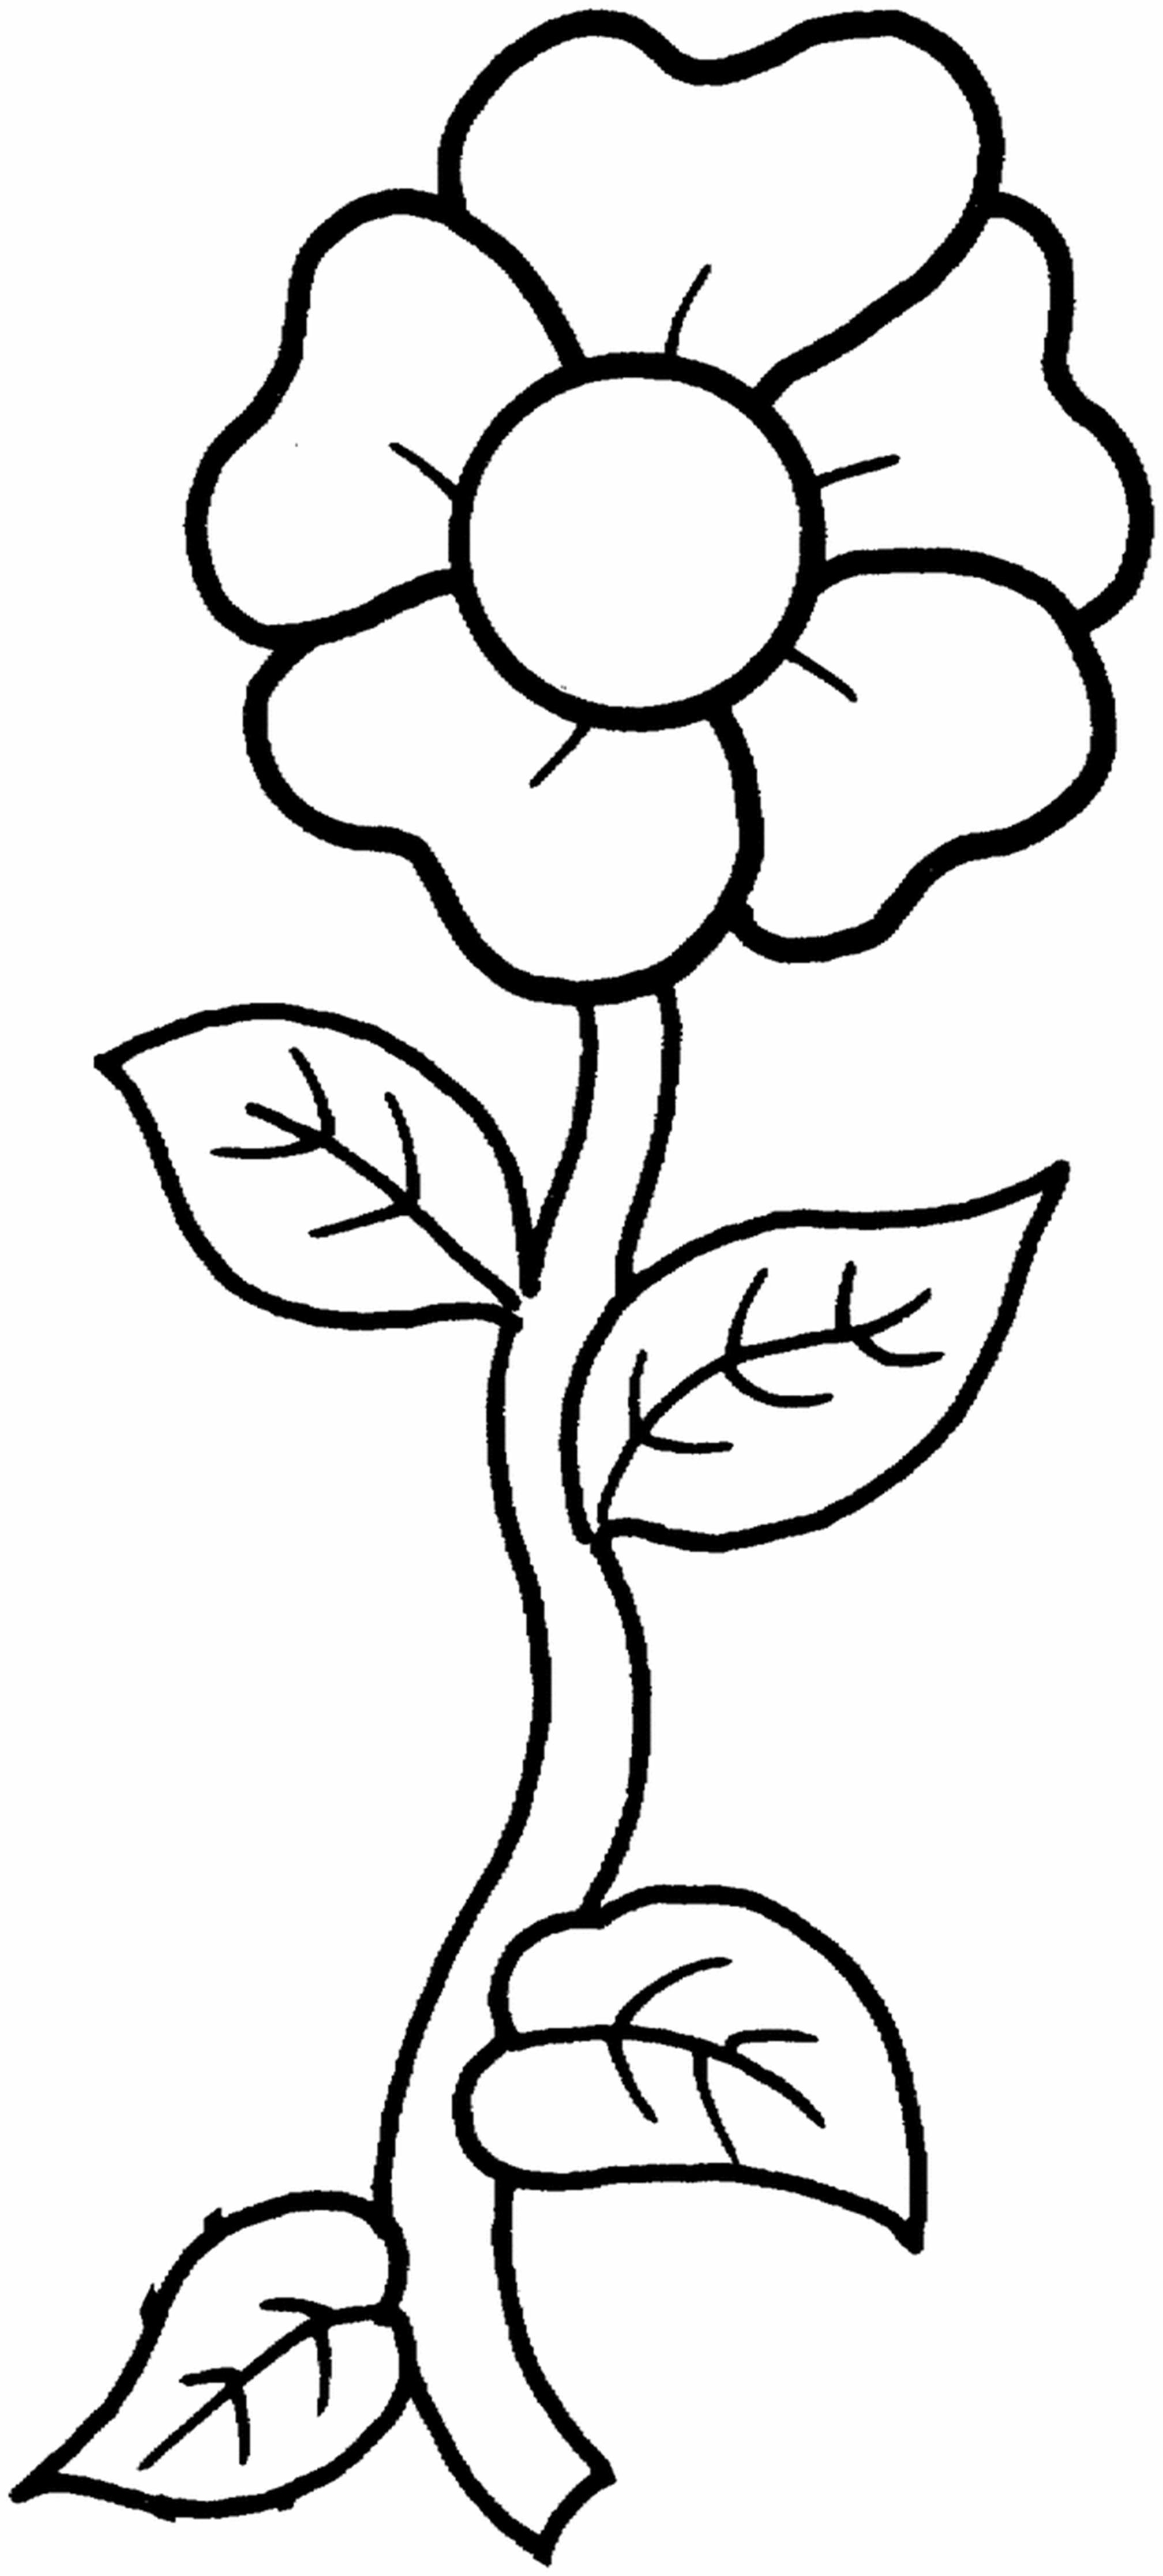 flower colouring pictures to print free printable flower coloring pages for kids best print flower pictures to colouring 